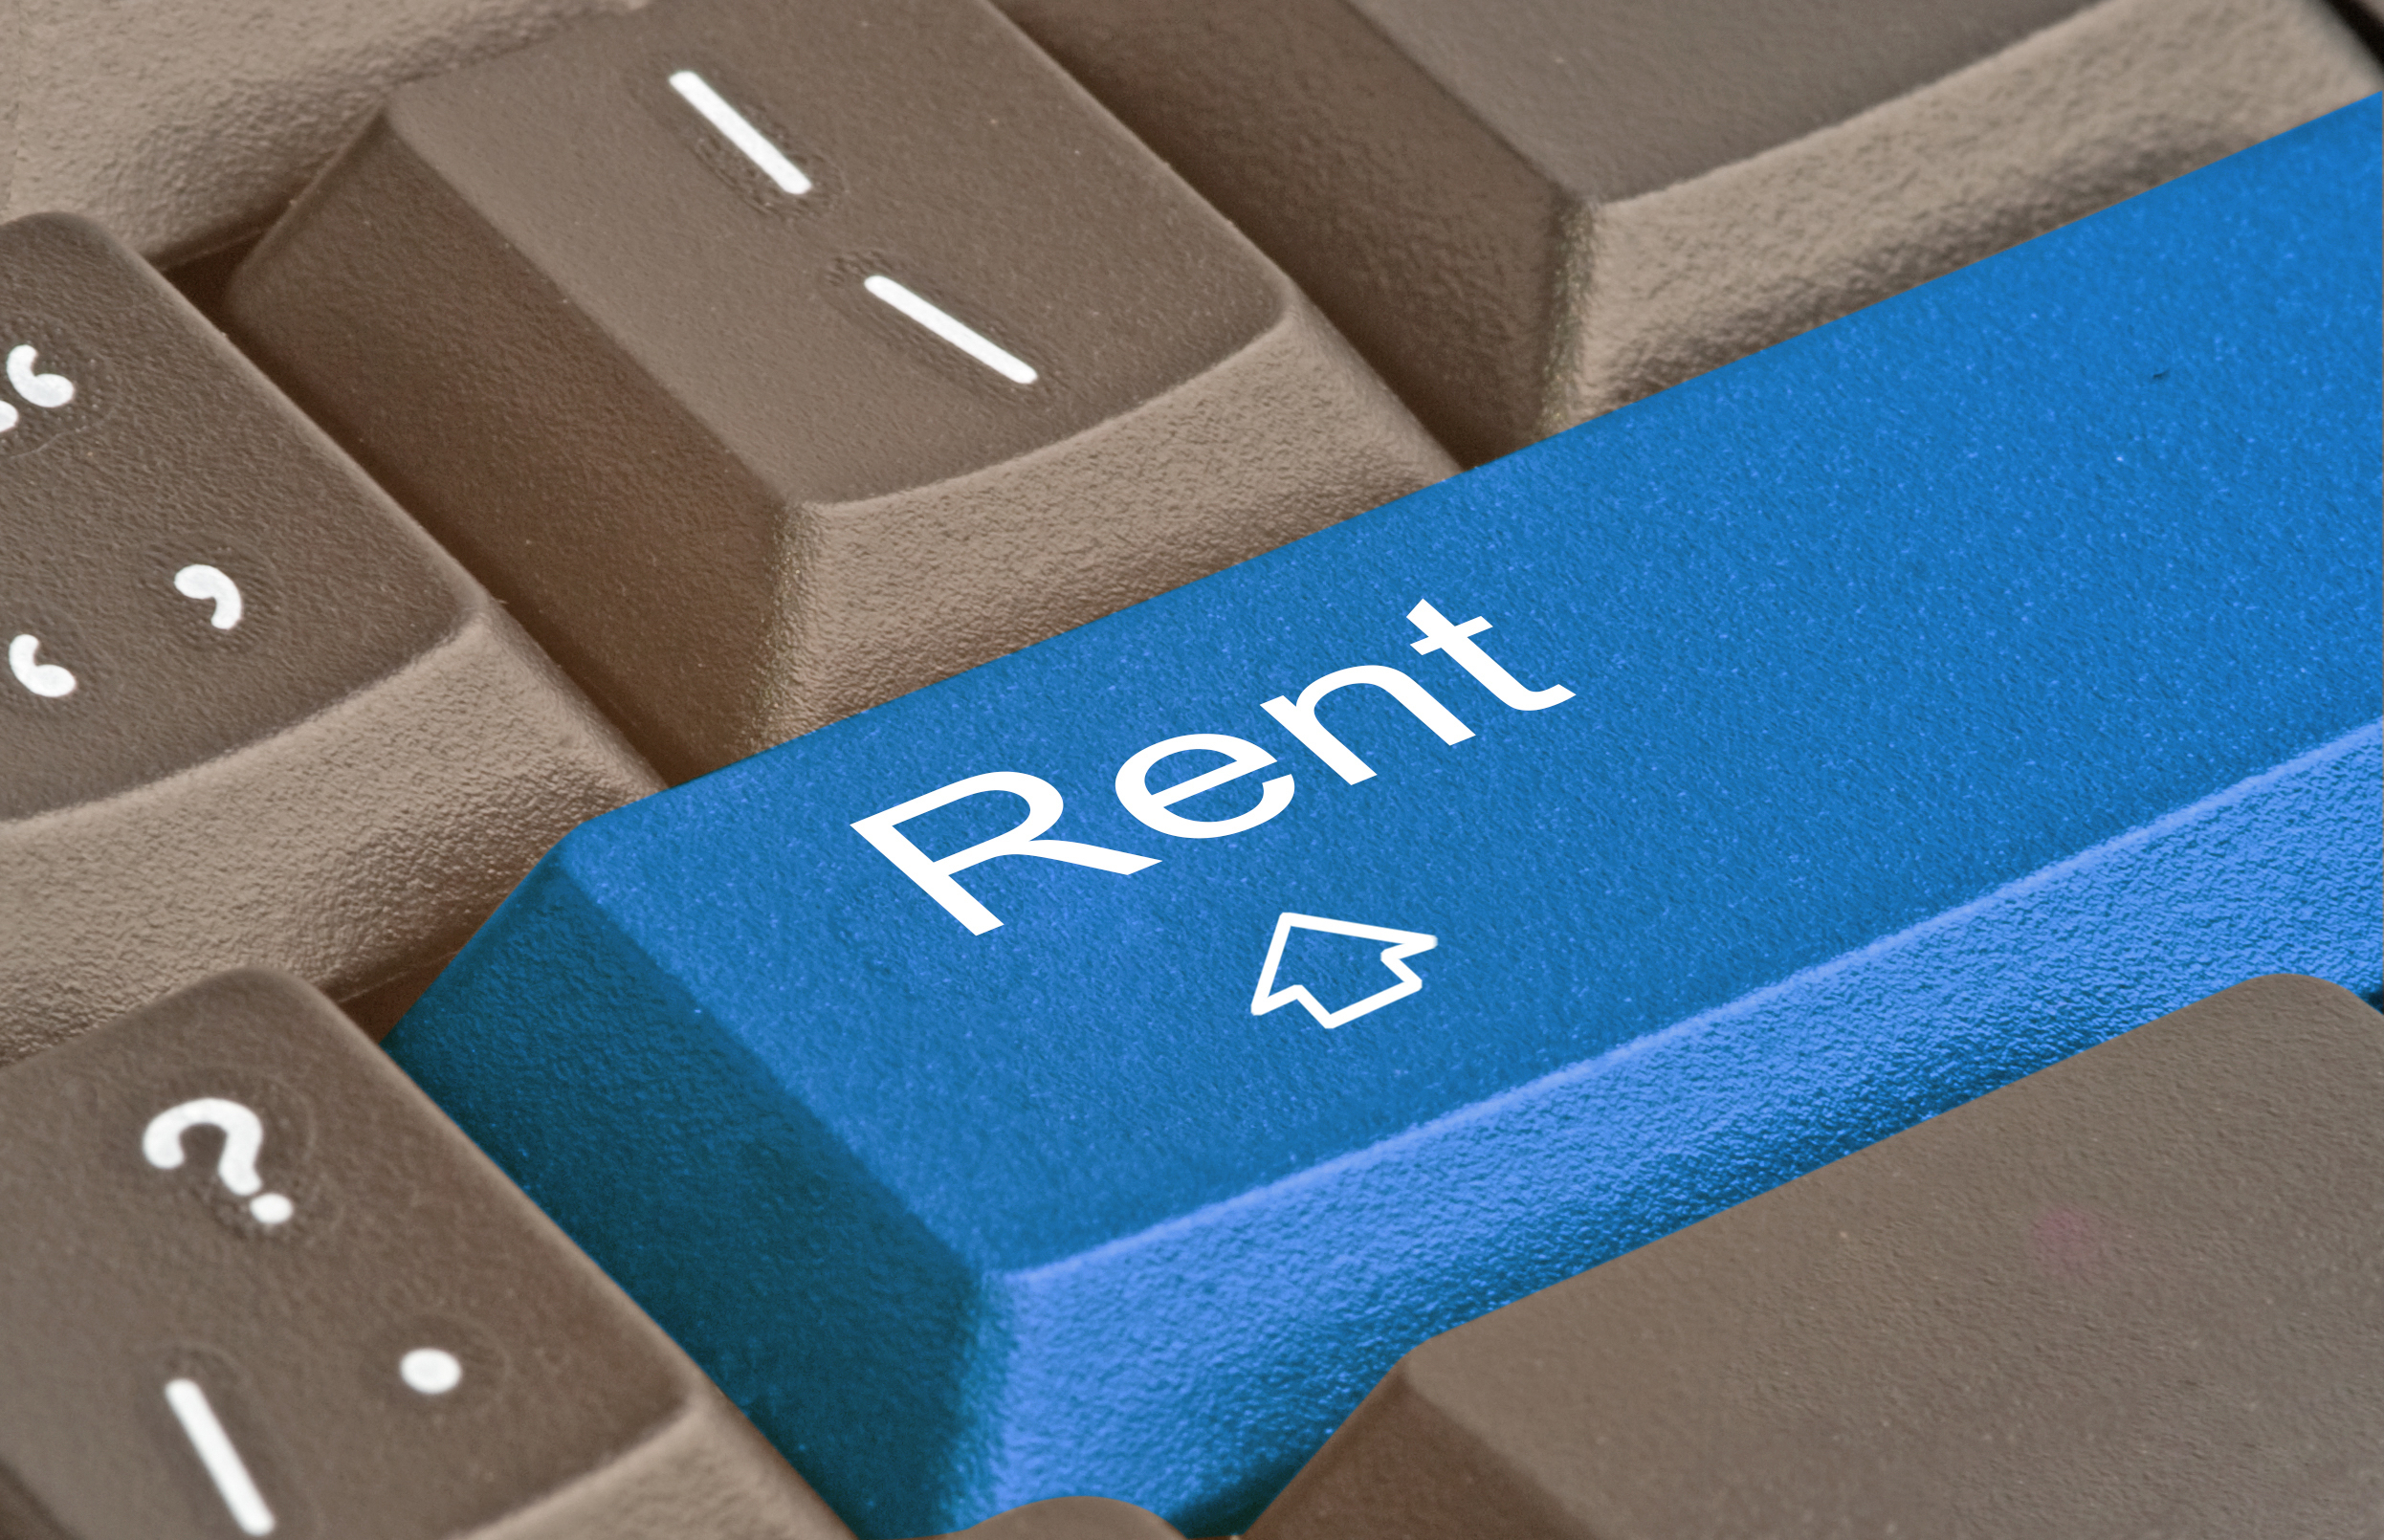 rent key on keyboard lets you collect rent online